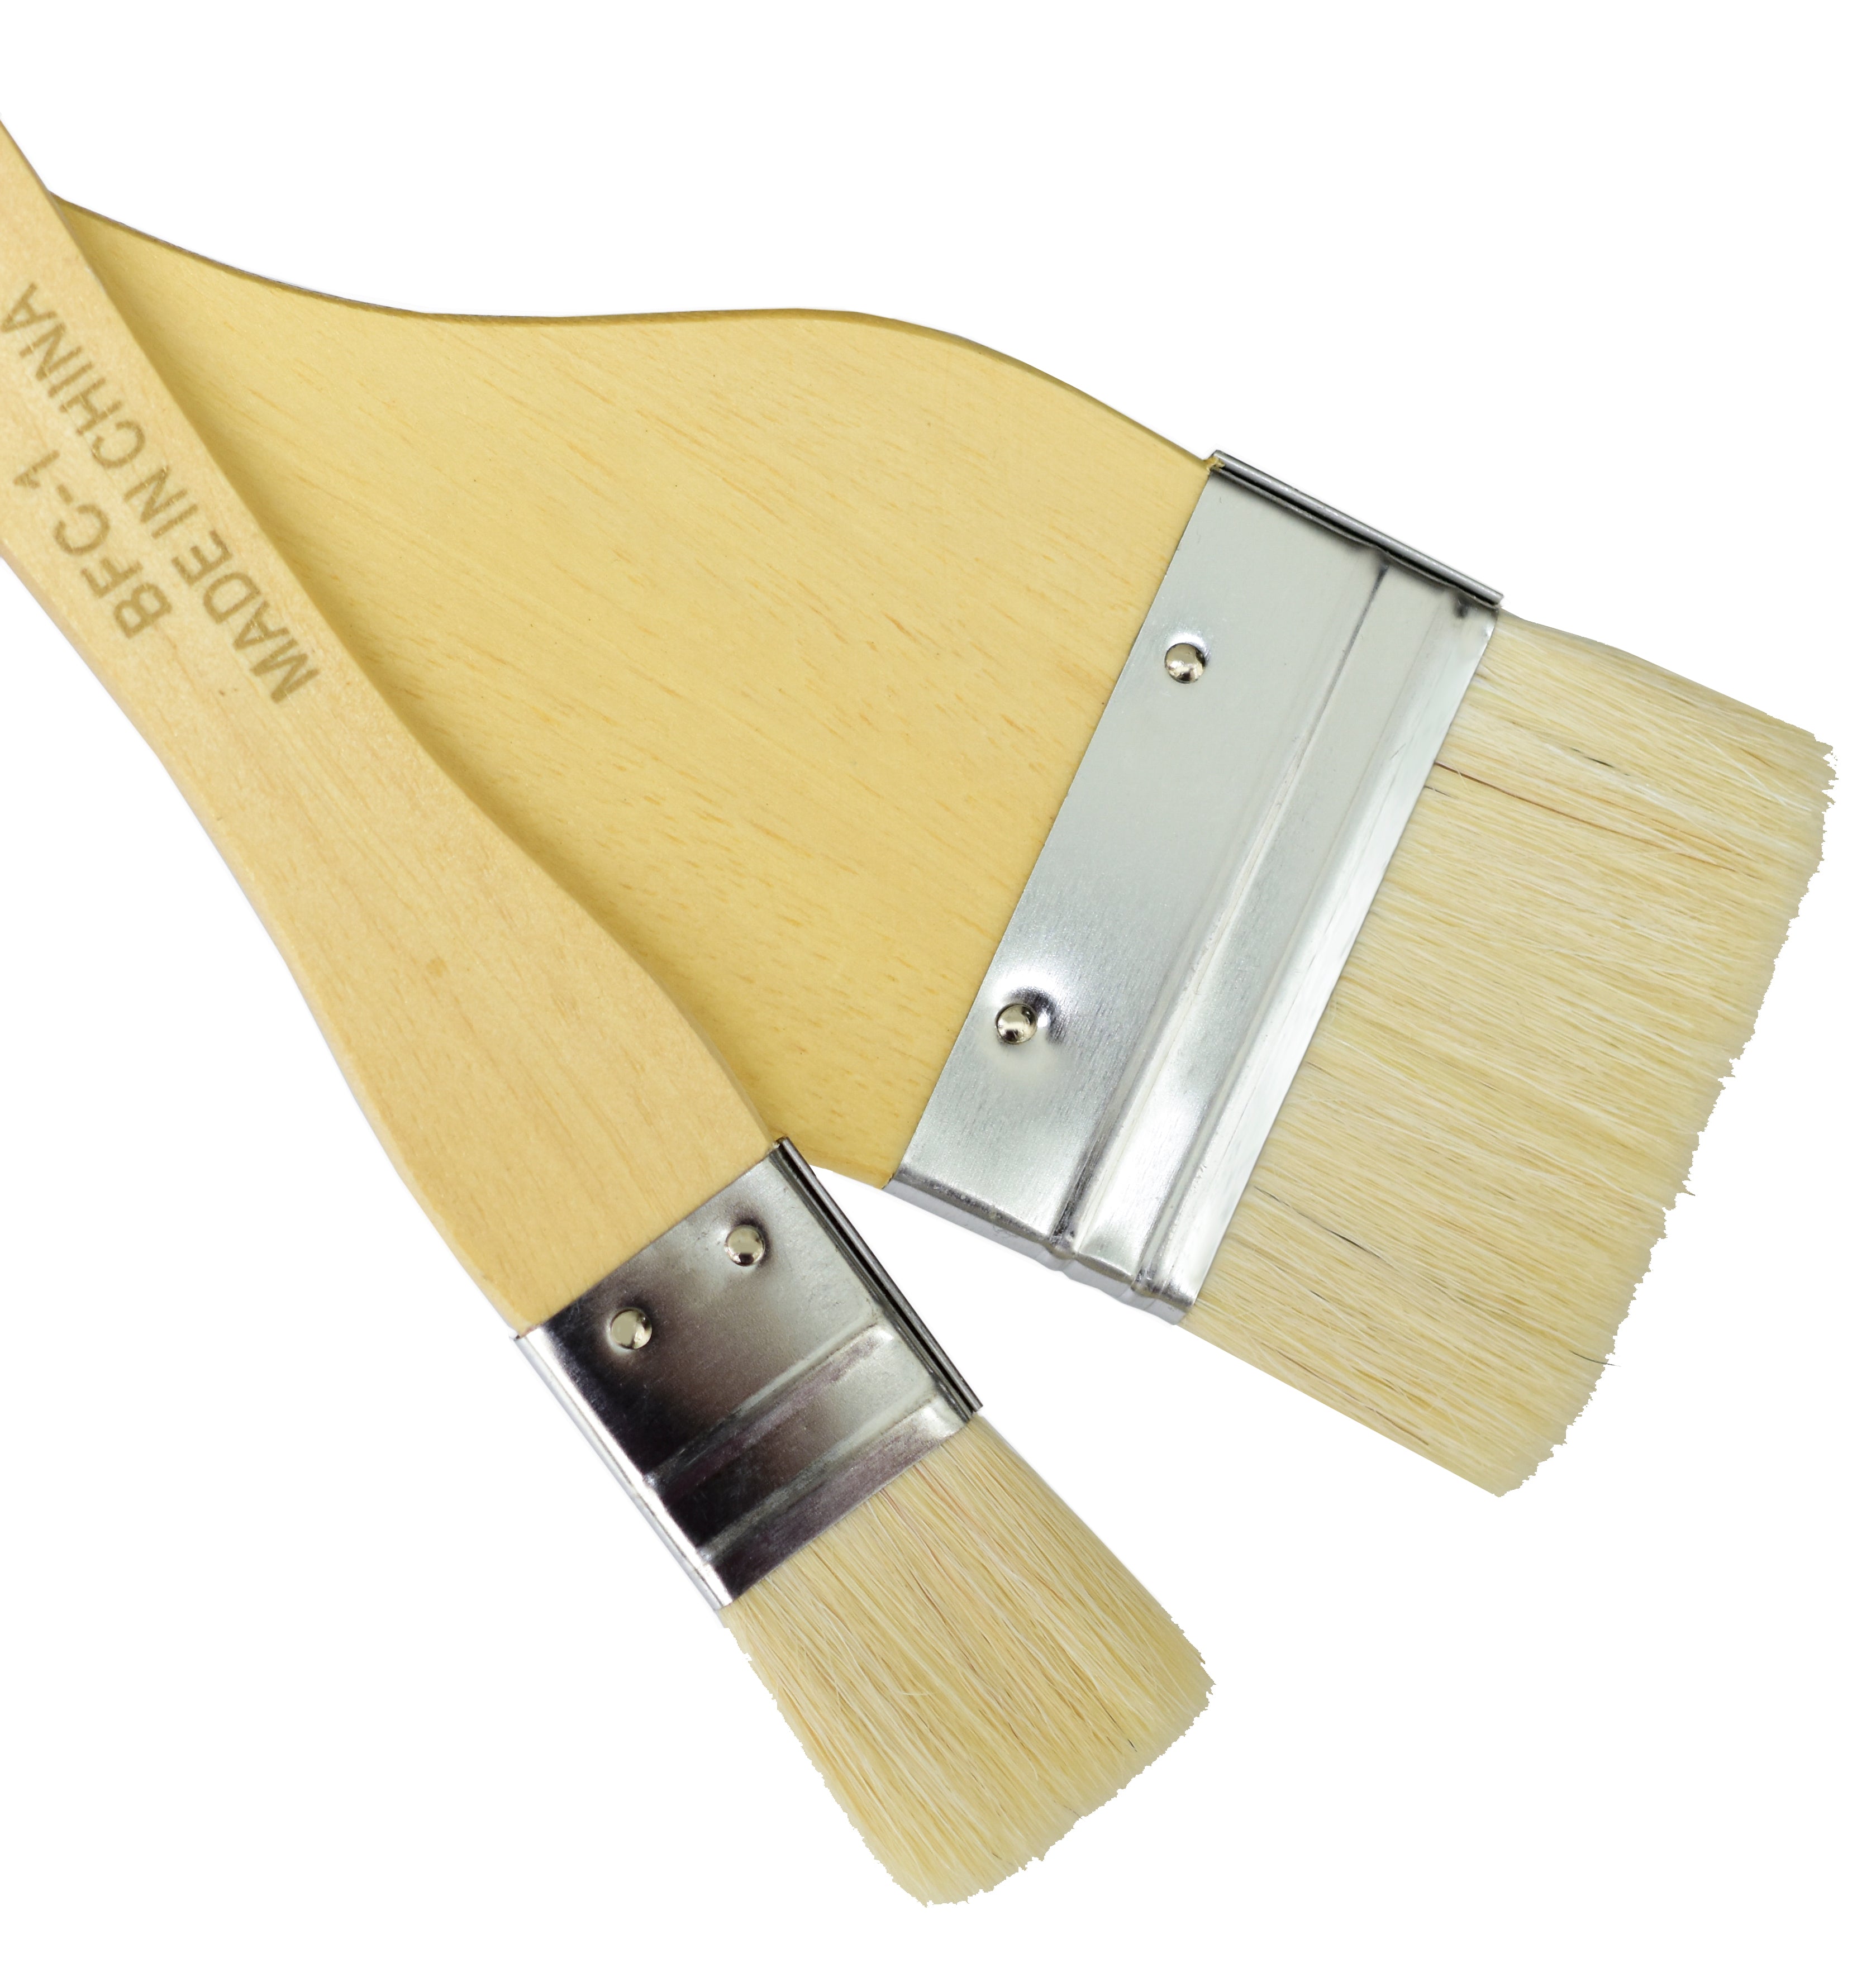 Connoisseur Flat Wide Hake Brush 3 by 1-1/4 Inches. Apply Thin Media Over  Large Areas Art, Painting, Watercolor, Shellac, Sizing, Gluing 